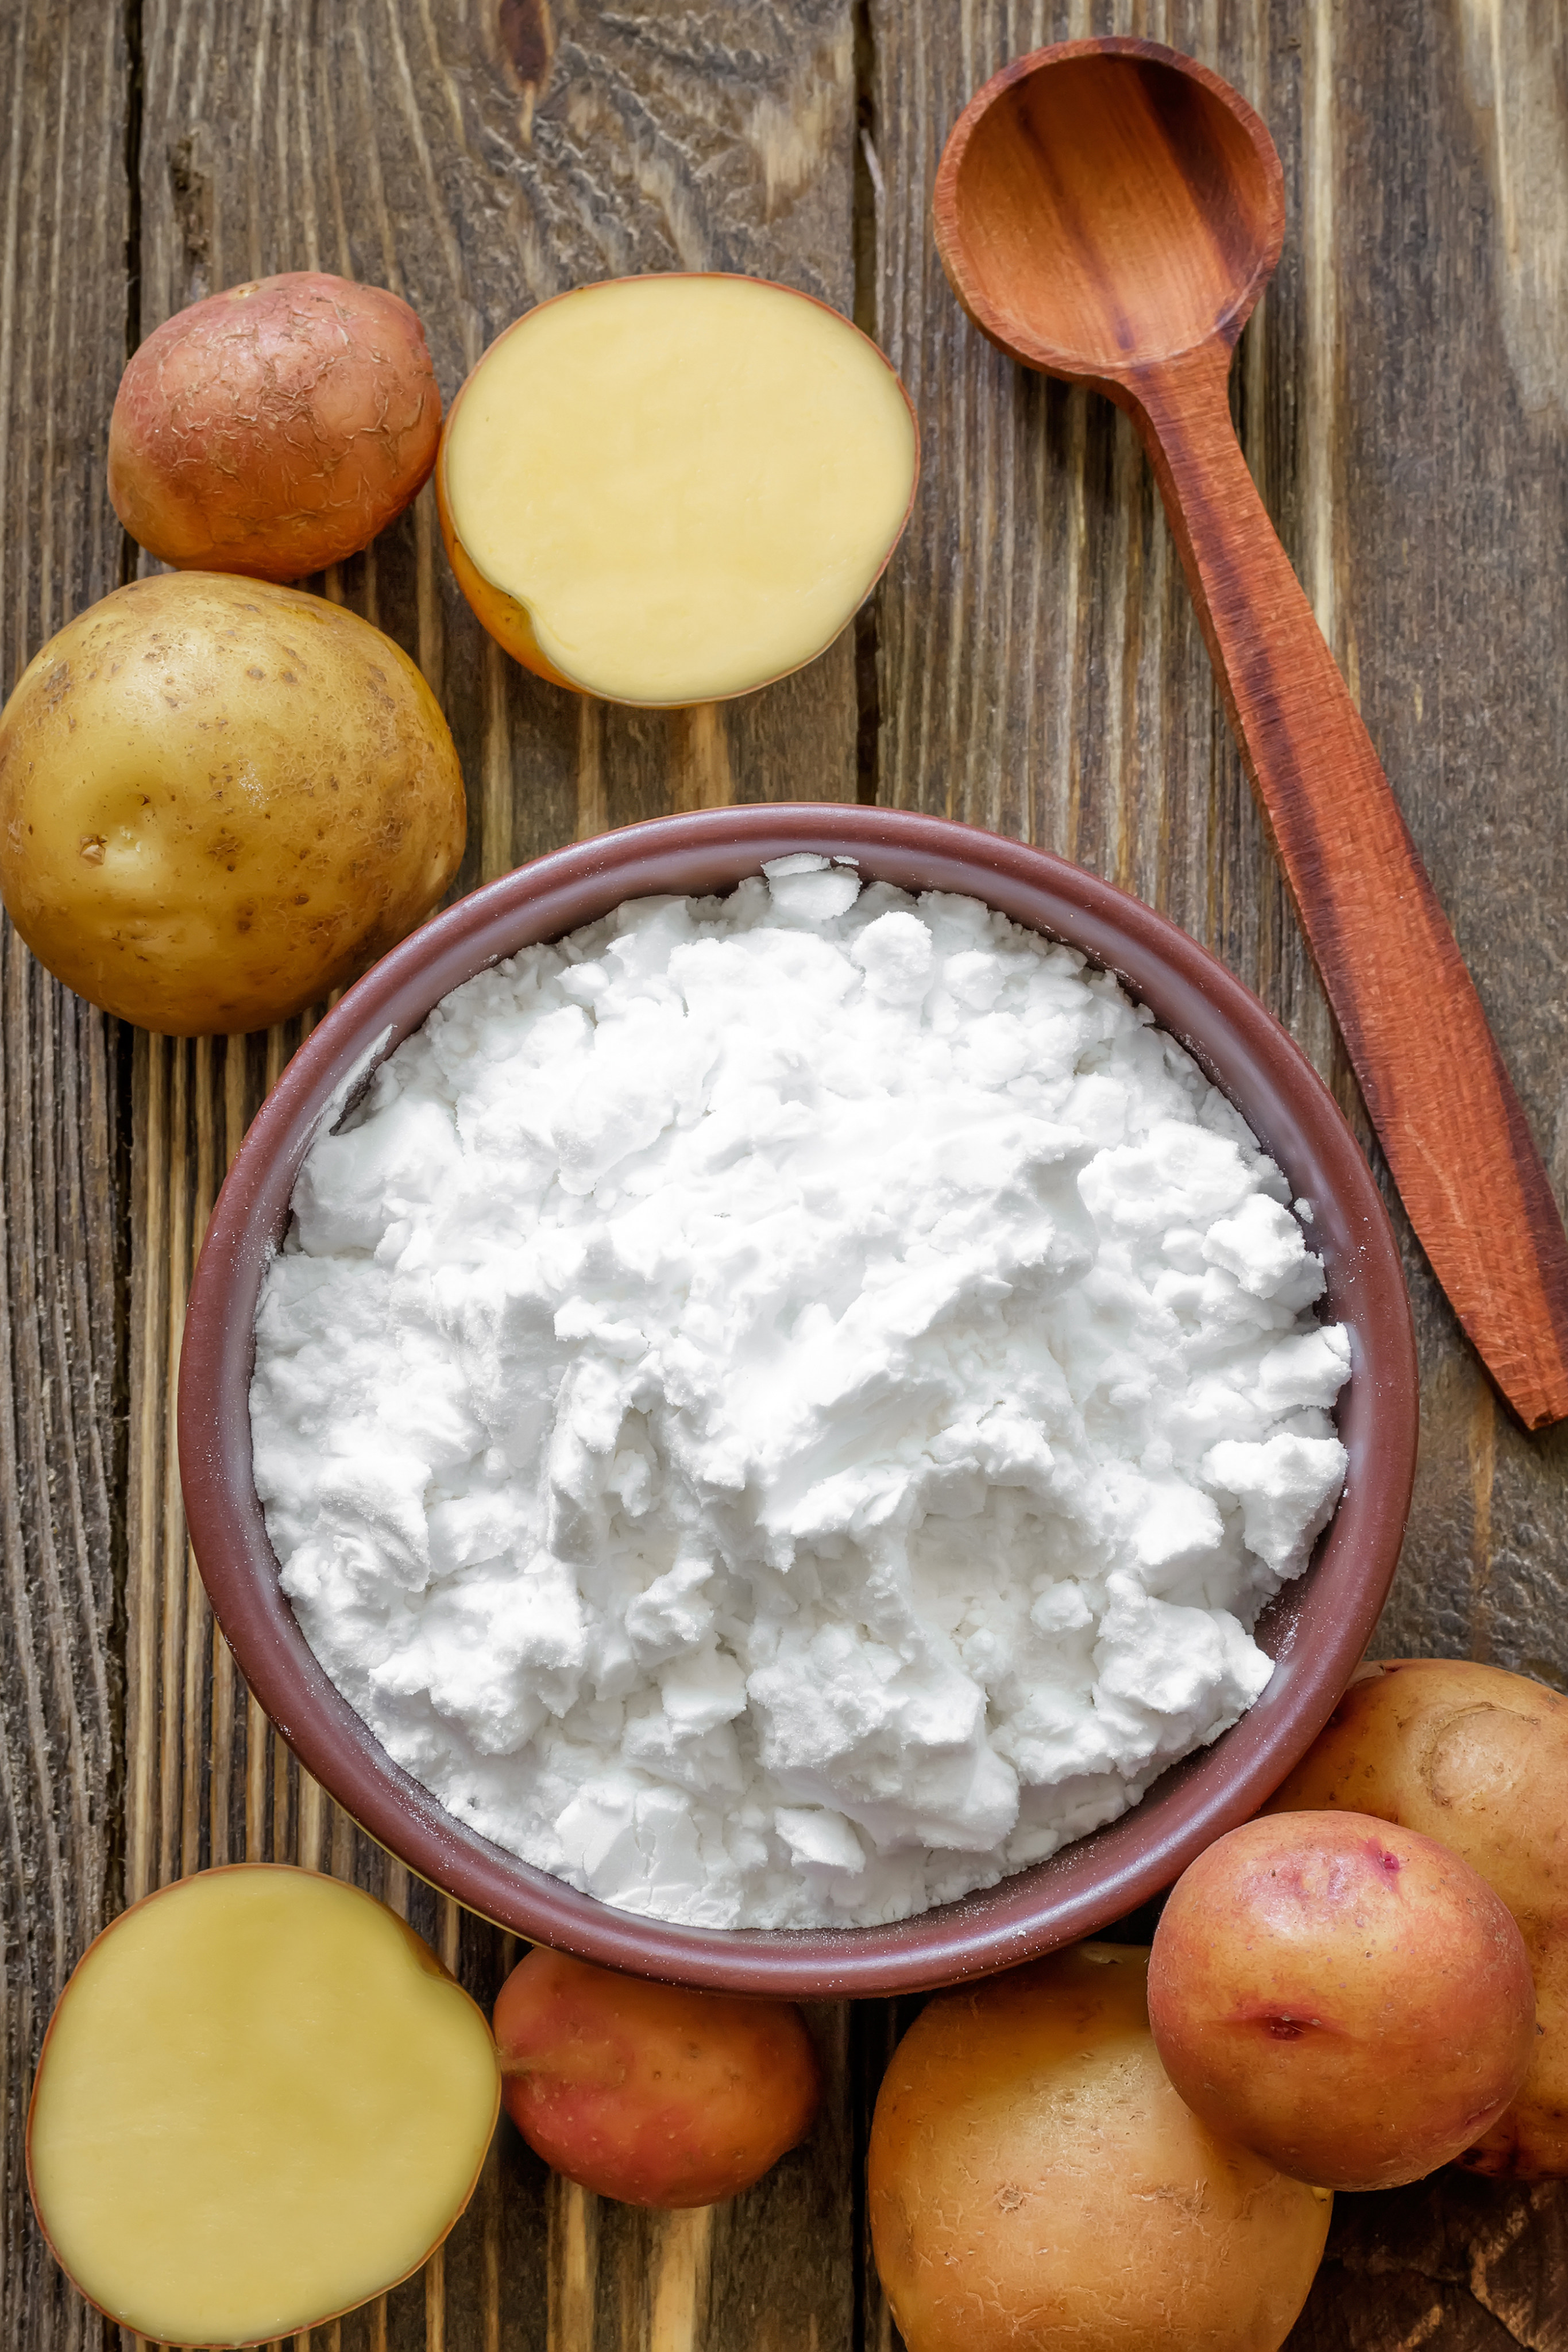 The tariff on potato starch imports was first levied in 2011, with rate of 7.5 to 12.4 per cent, before being extended in 2017. Photo: Shutterstock